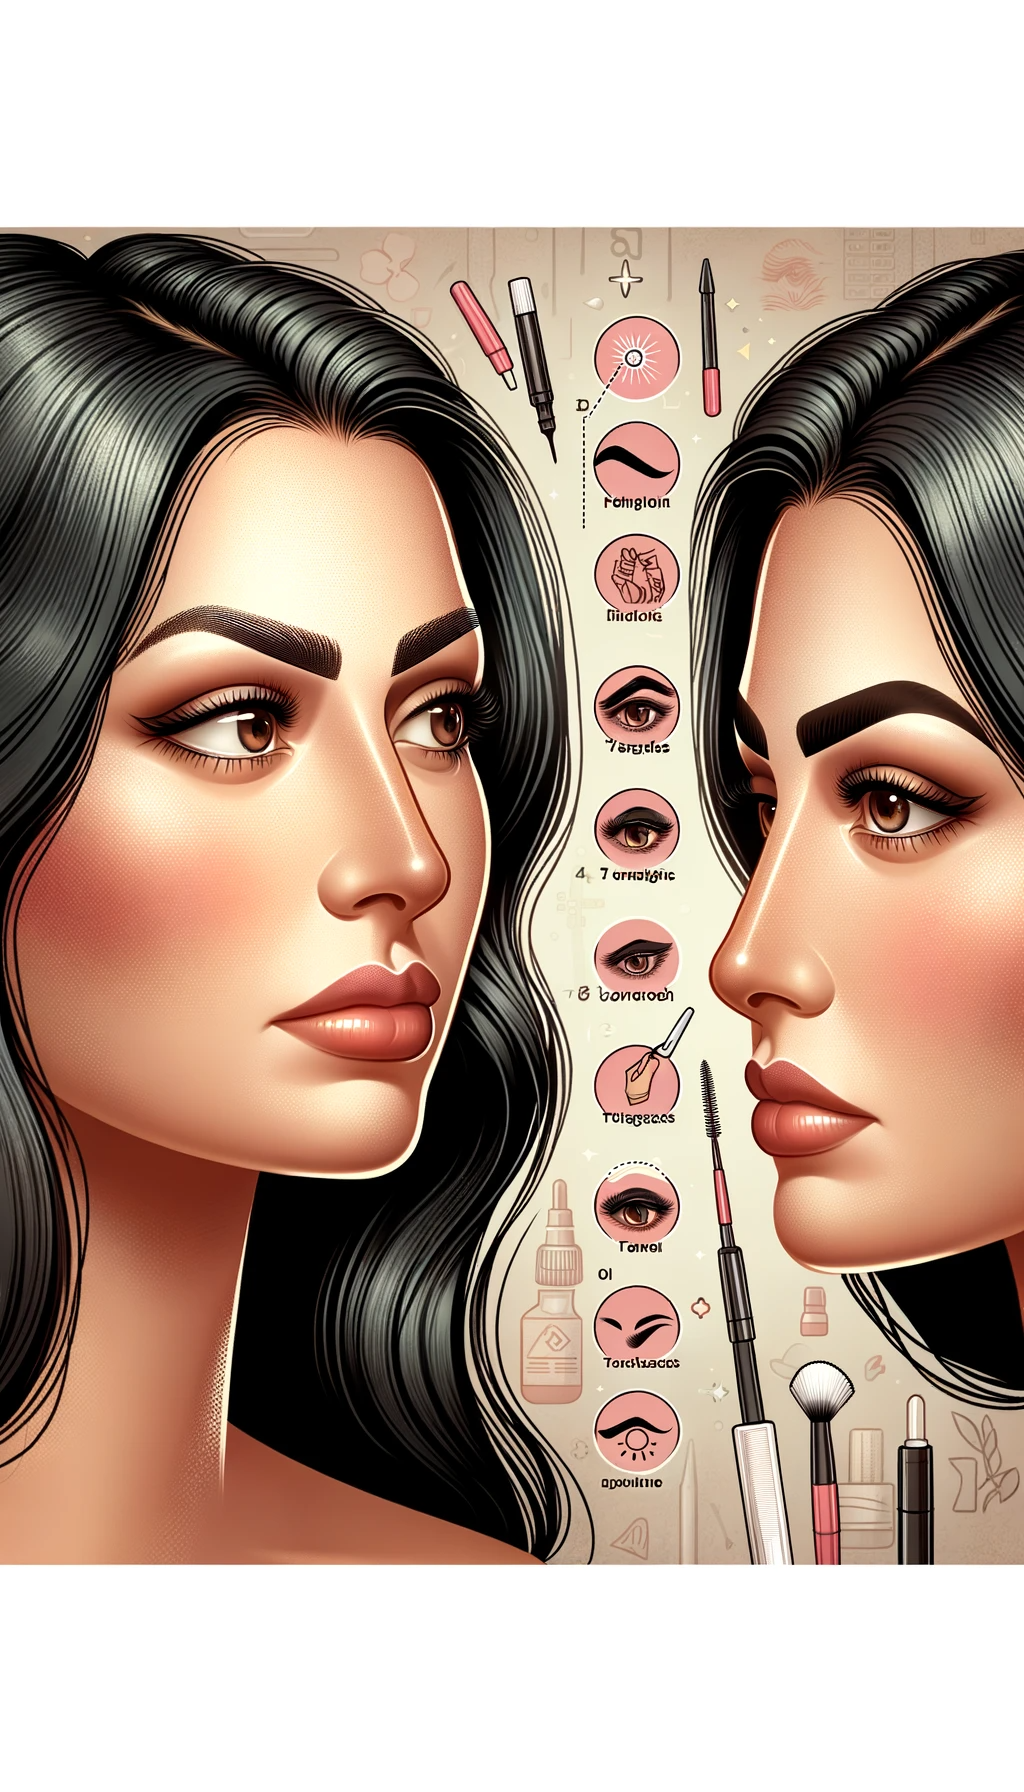 A detailed portrait illustrating Fixing Bad Microblading Eyebrows 7 Tips and Tricks. The image features a woman of Hispanic descent looking at her